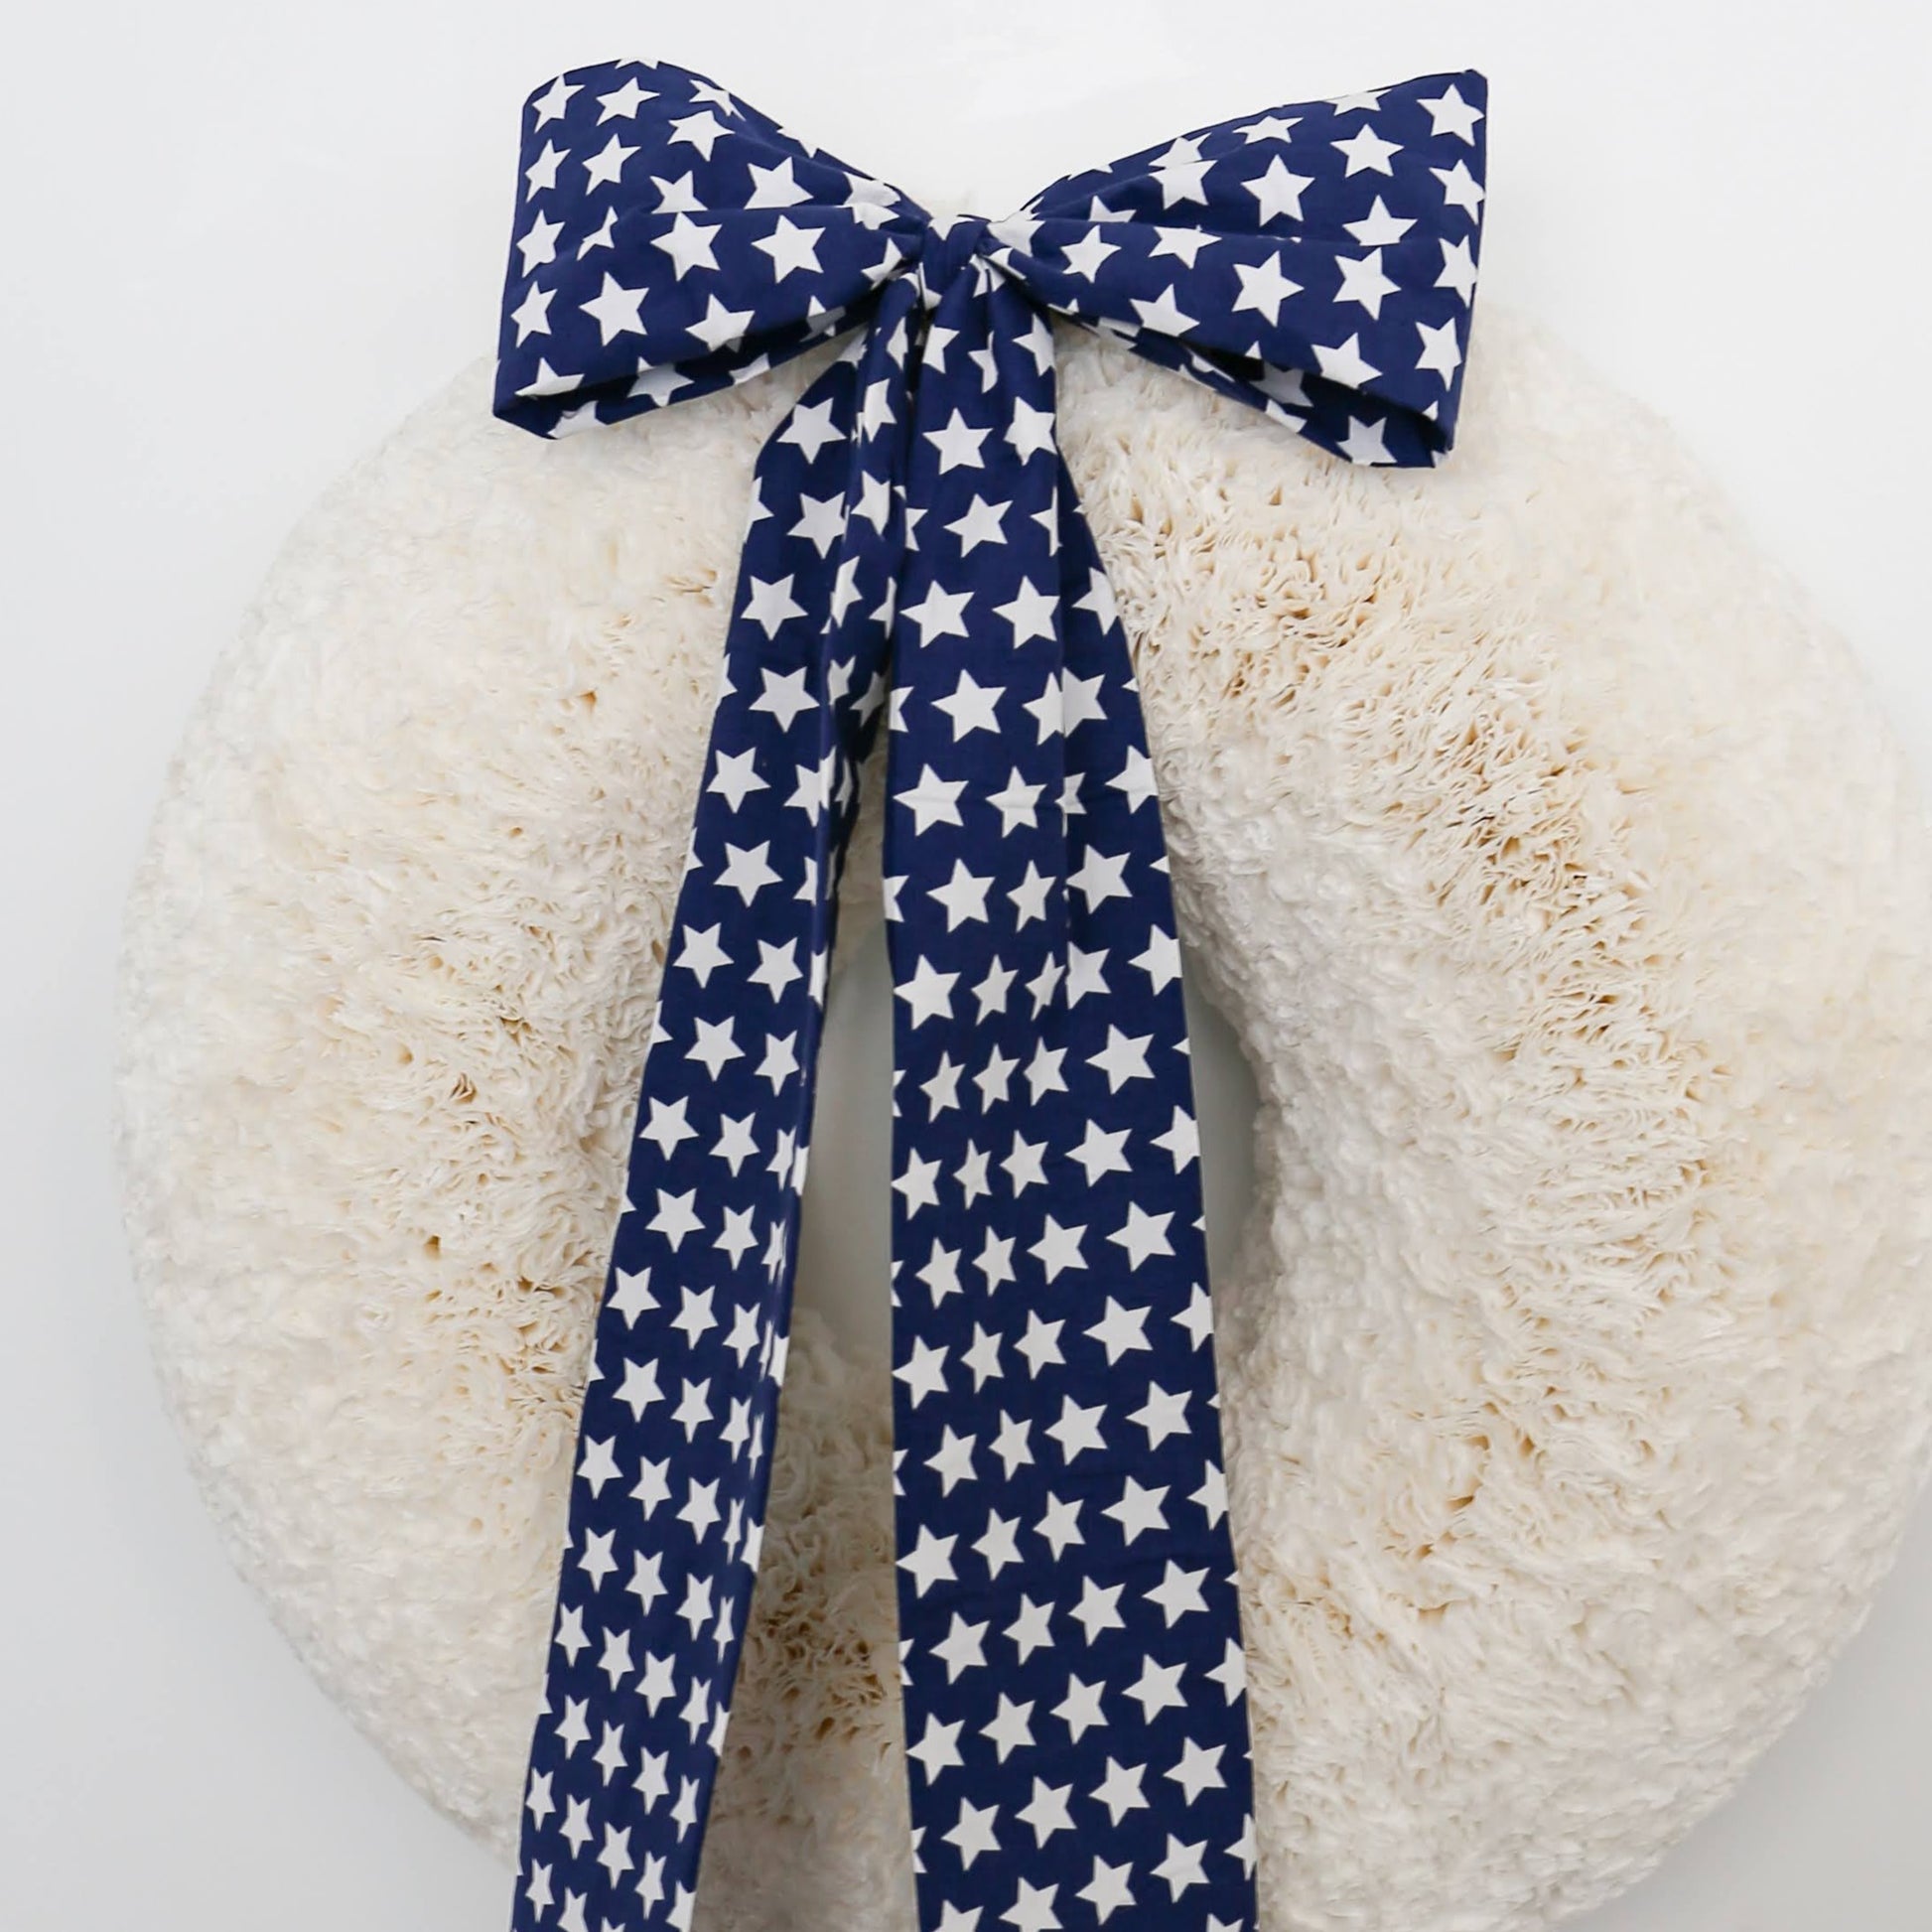 Sky Full of Stars Bow on White Coffee Filter Wreath